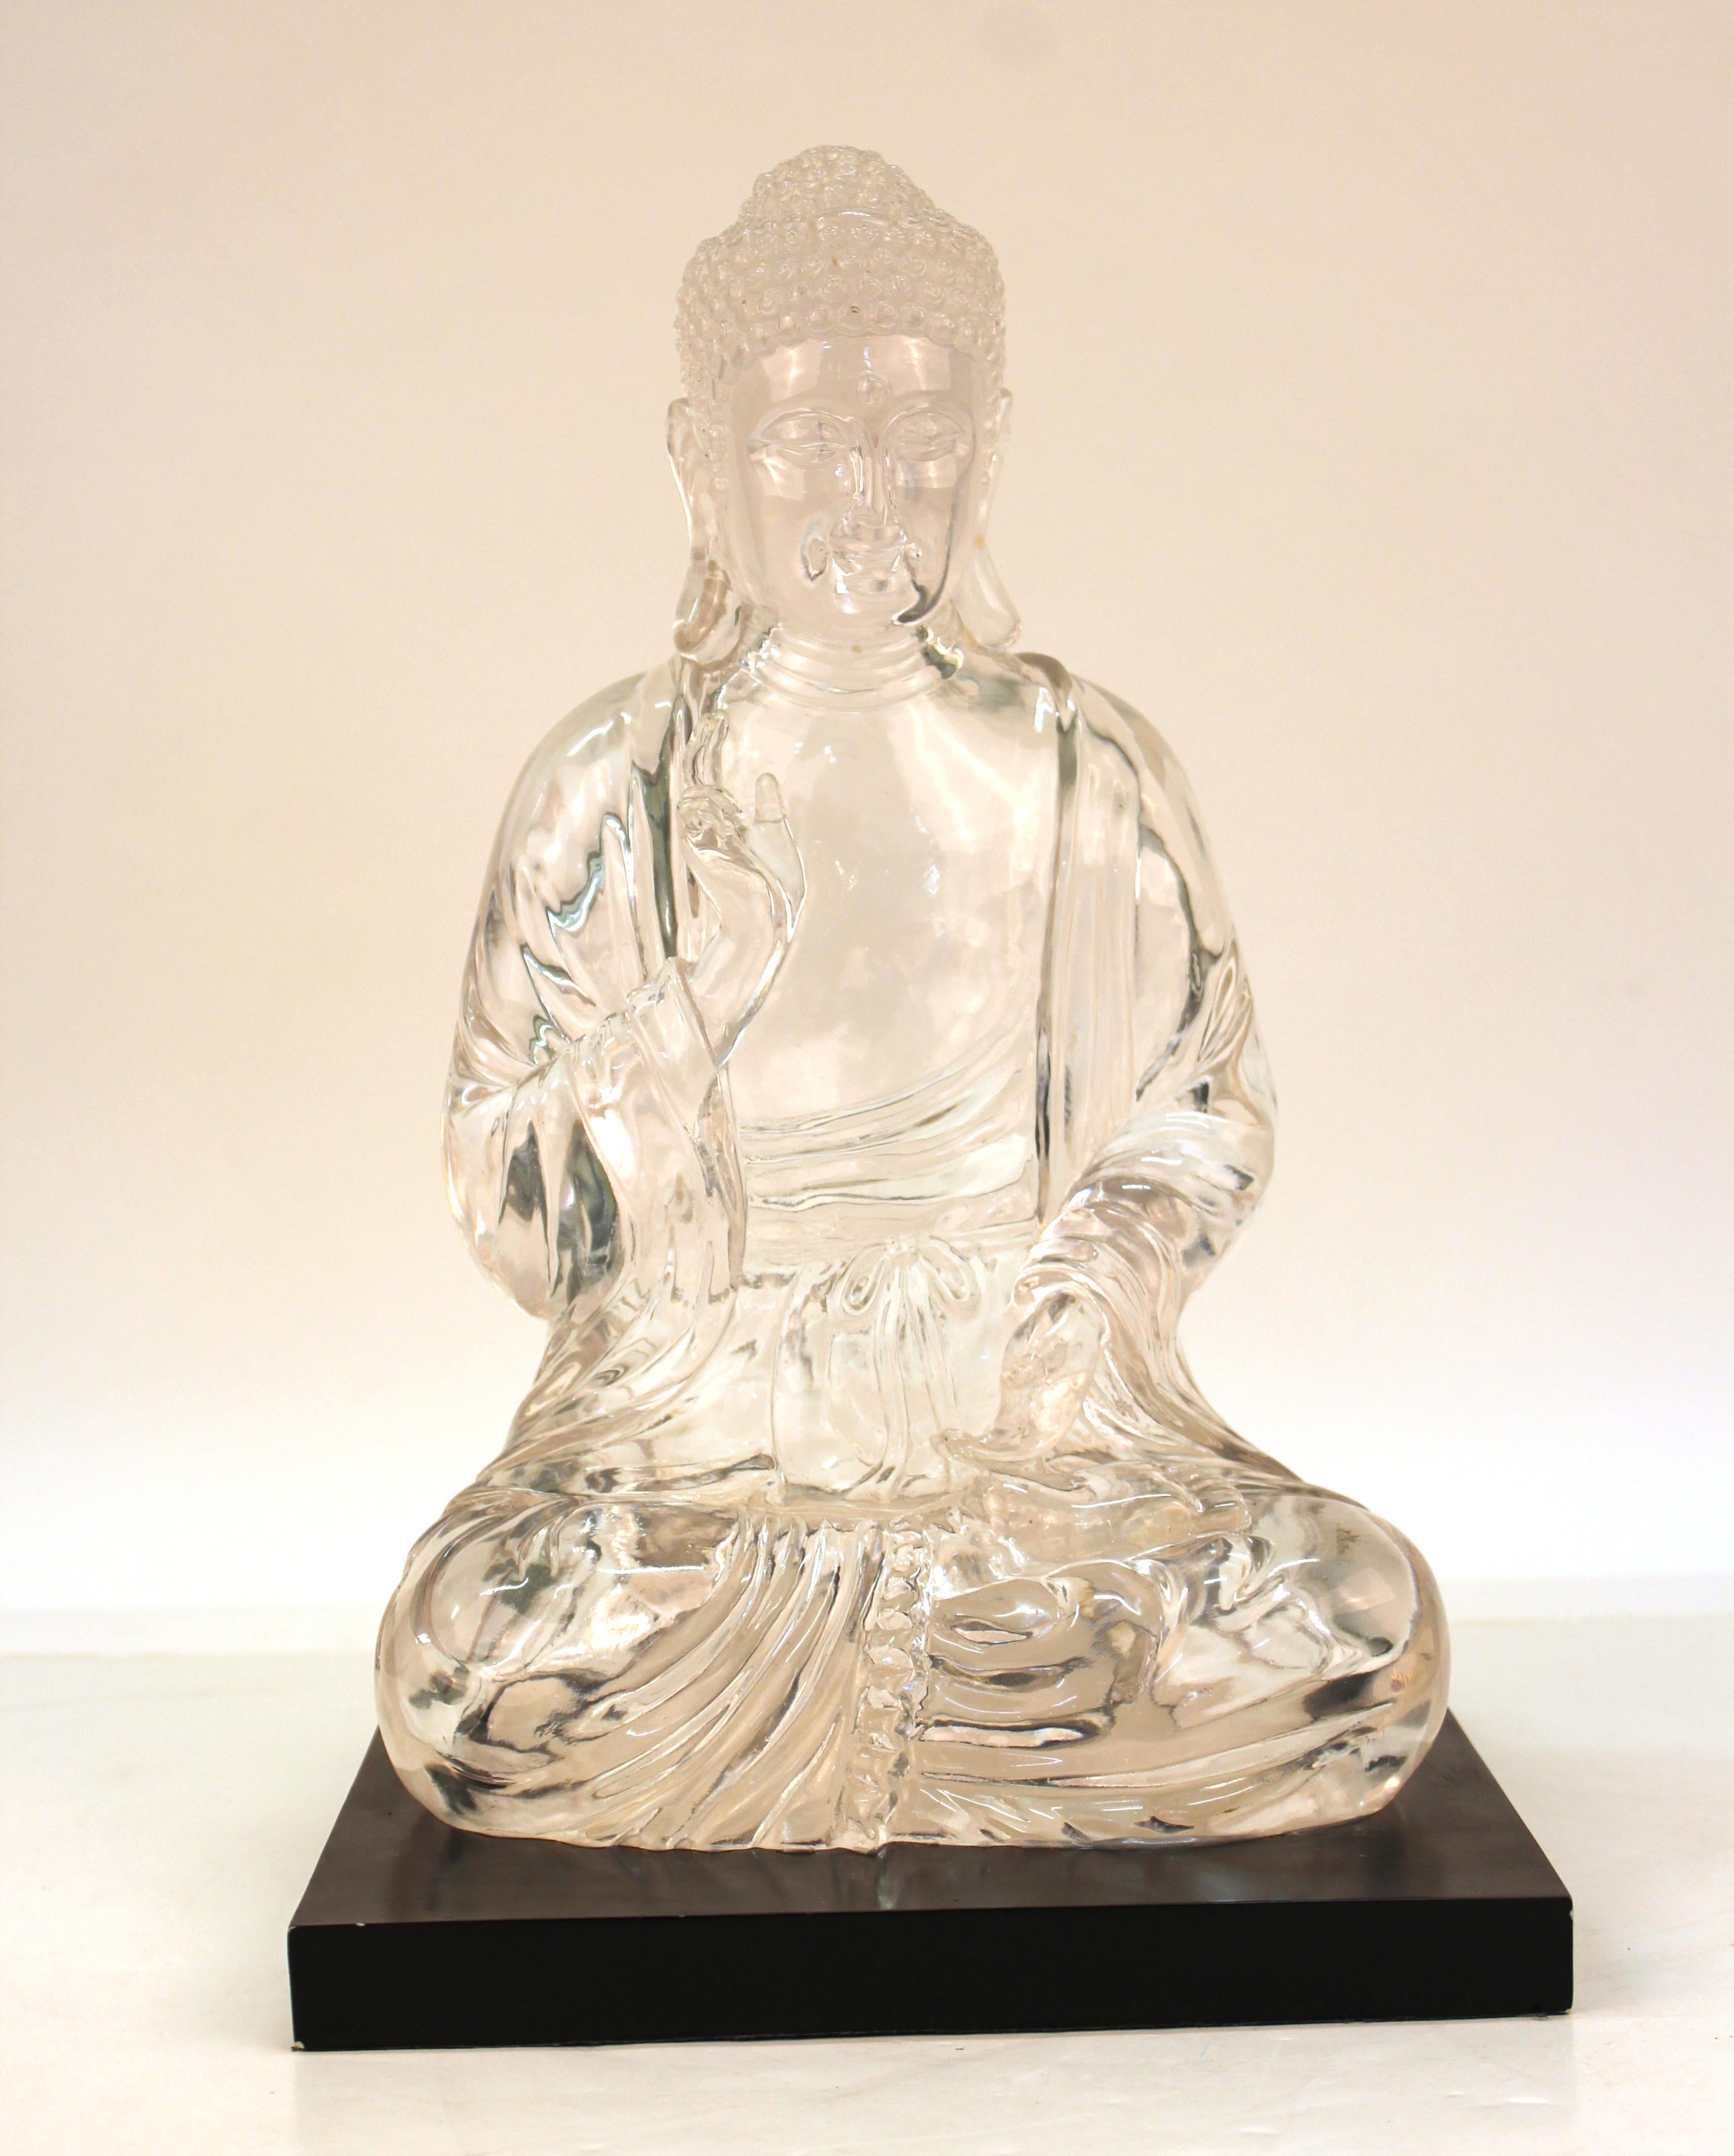 Mid-Century Modern statue of a Buddha in seated position, in clear resin atop a black base. The piece dates to the 1960s-1970s and is in great vintage condition. Age-appropriate wear to the base.